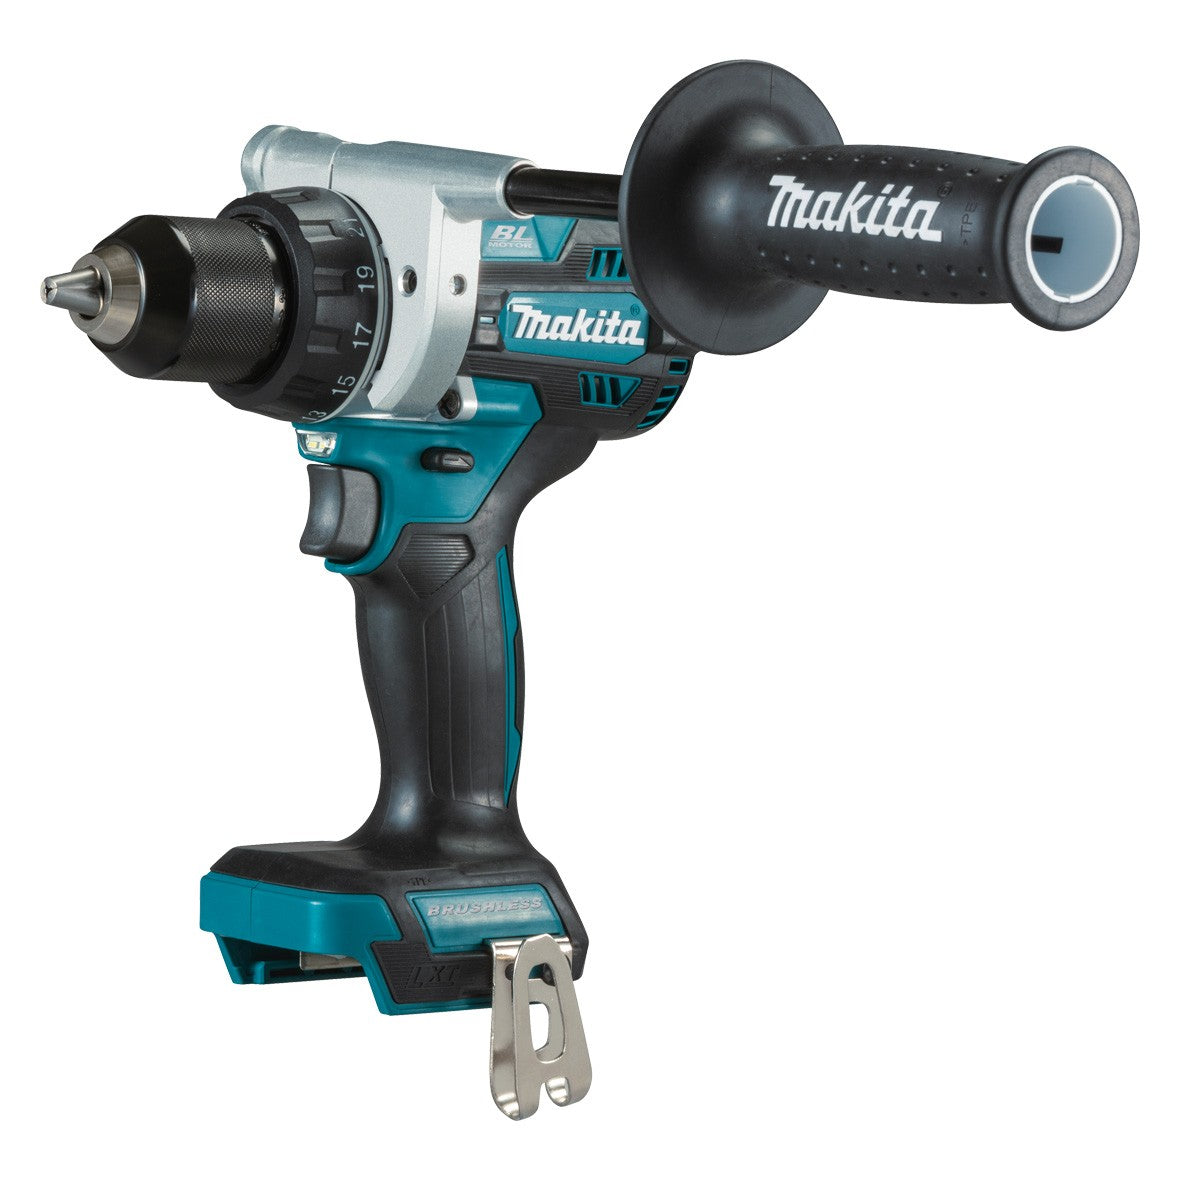 18V Brushless Heavy Duty Driver Drill Bare (Tool Only) DDF486Z by Makita